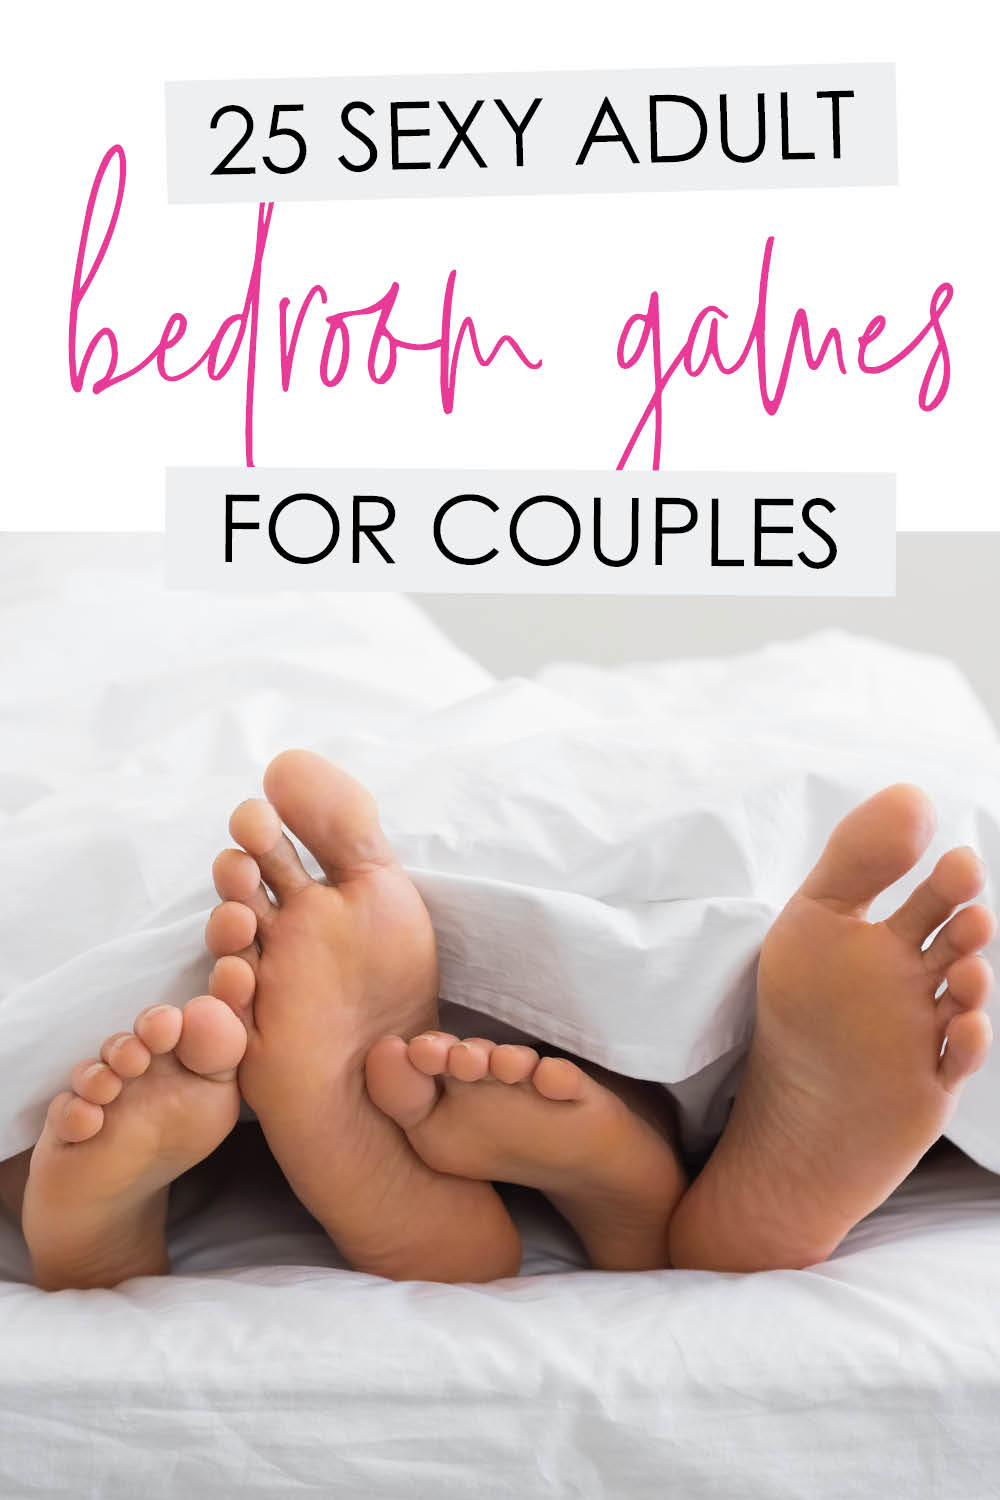 Free adult games for couples